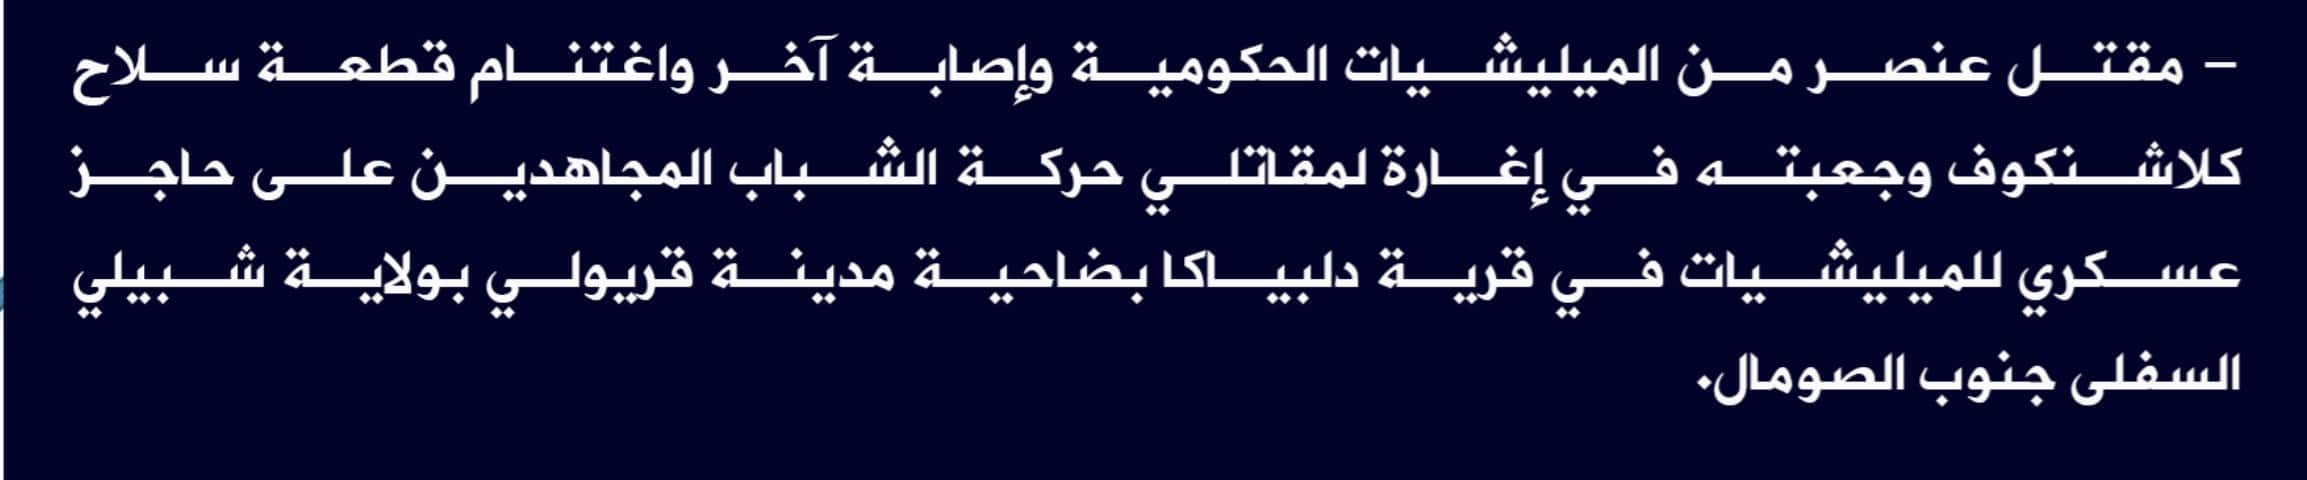 (Claim) al-Shabaab: A Somalian Army Element Was Killed, Another Injured and a Kalashnikov Was Seized in an Attack on a Checkpoint in Dalbiaka Village, Qarioli City, Lower Shabelle State, Southern Somalia - 18 April 2022